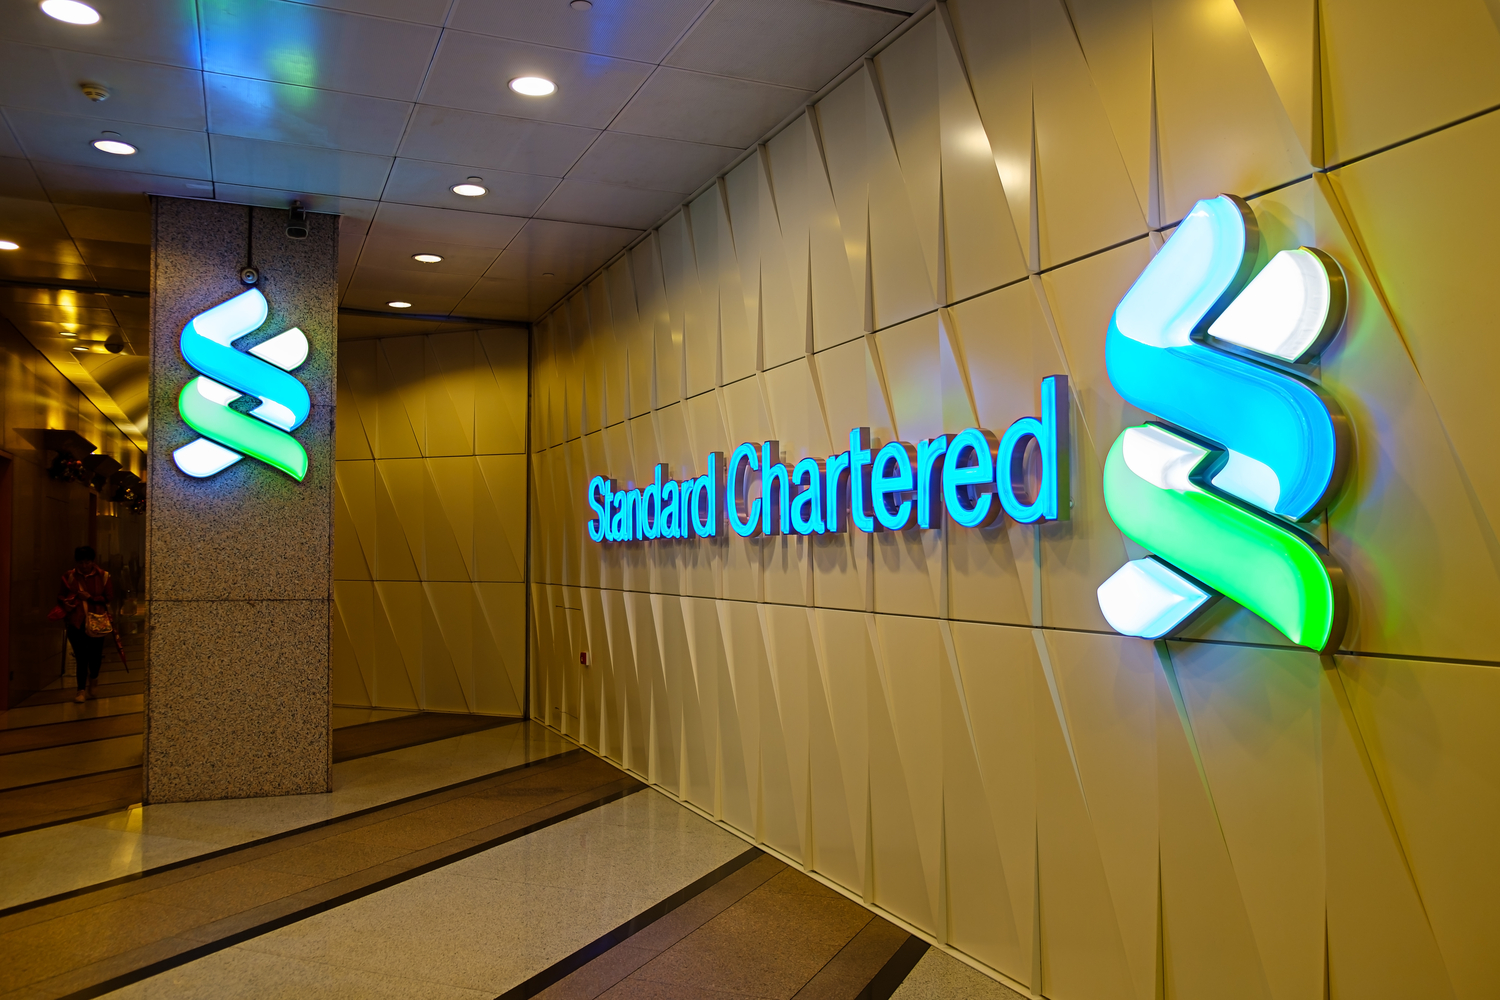 Standard-chartered-claims-first-yuan-based-letter-of-credit-issued-on-a-blockchain